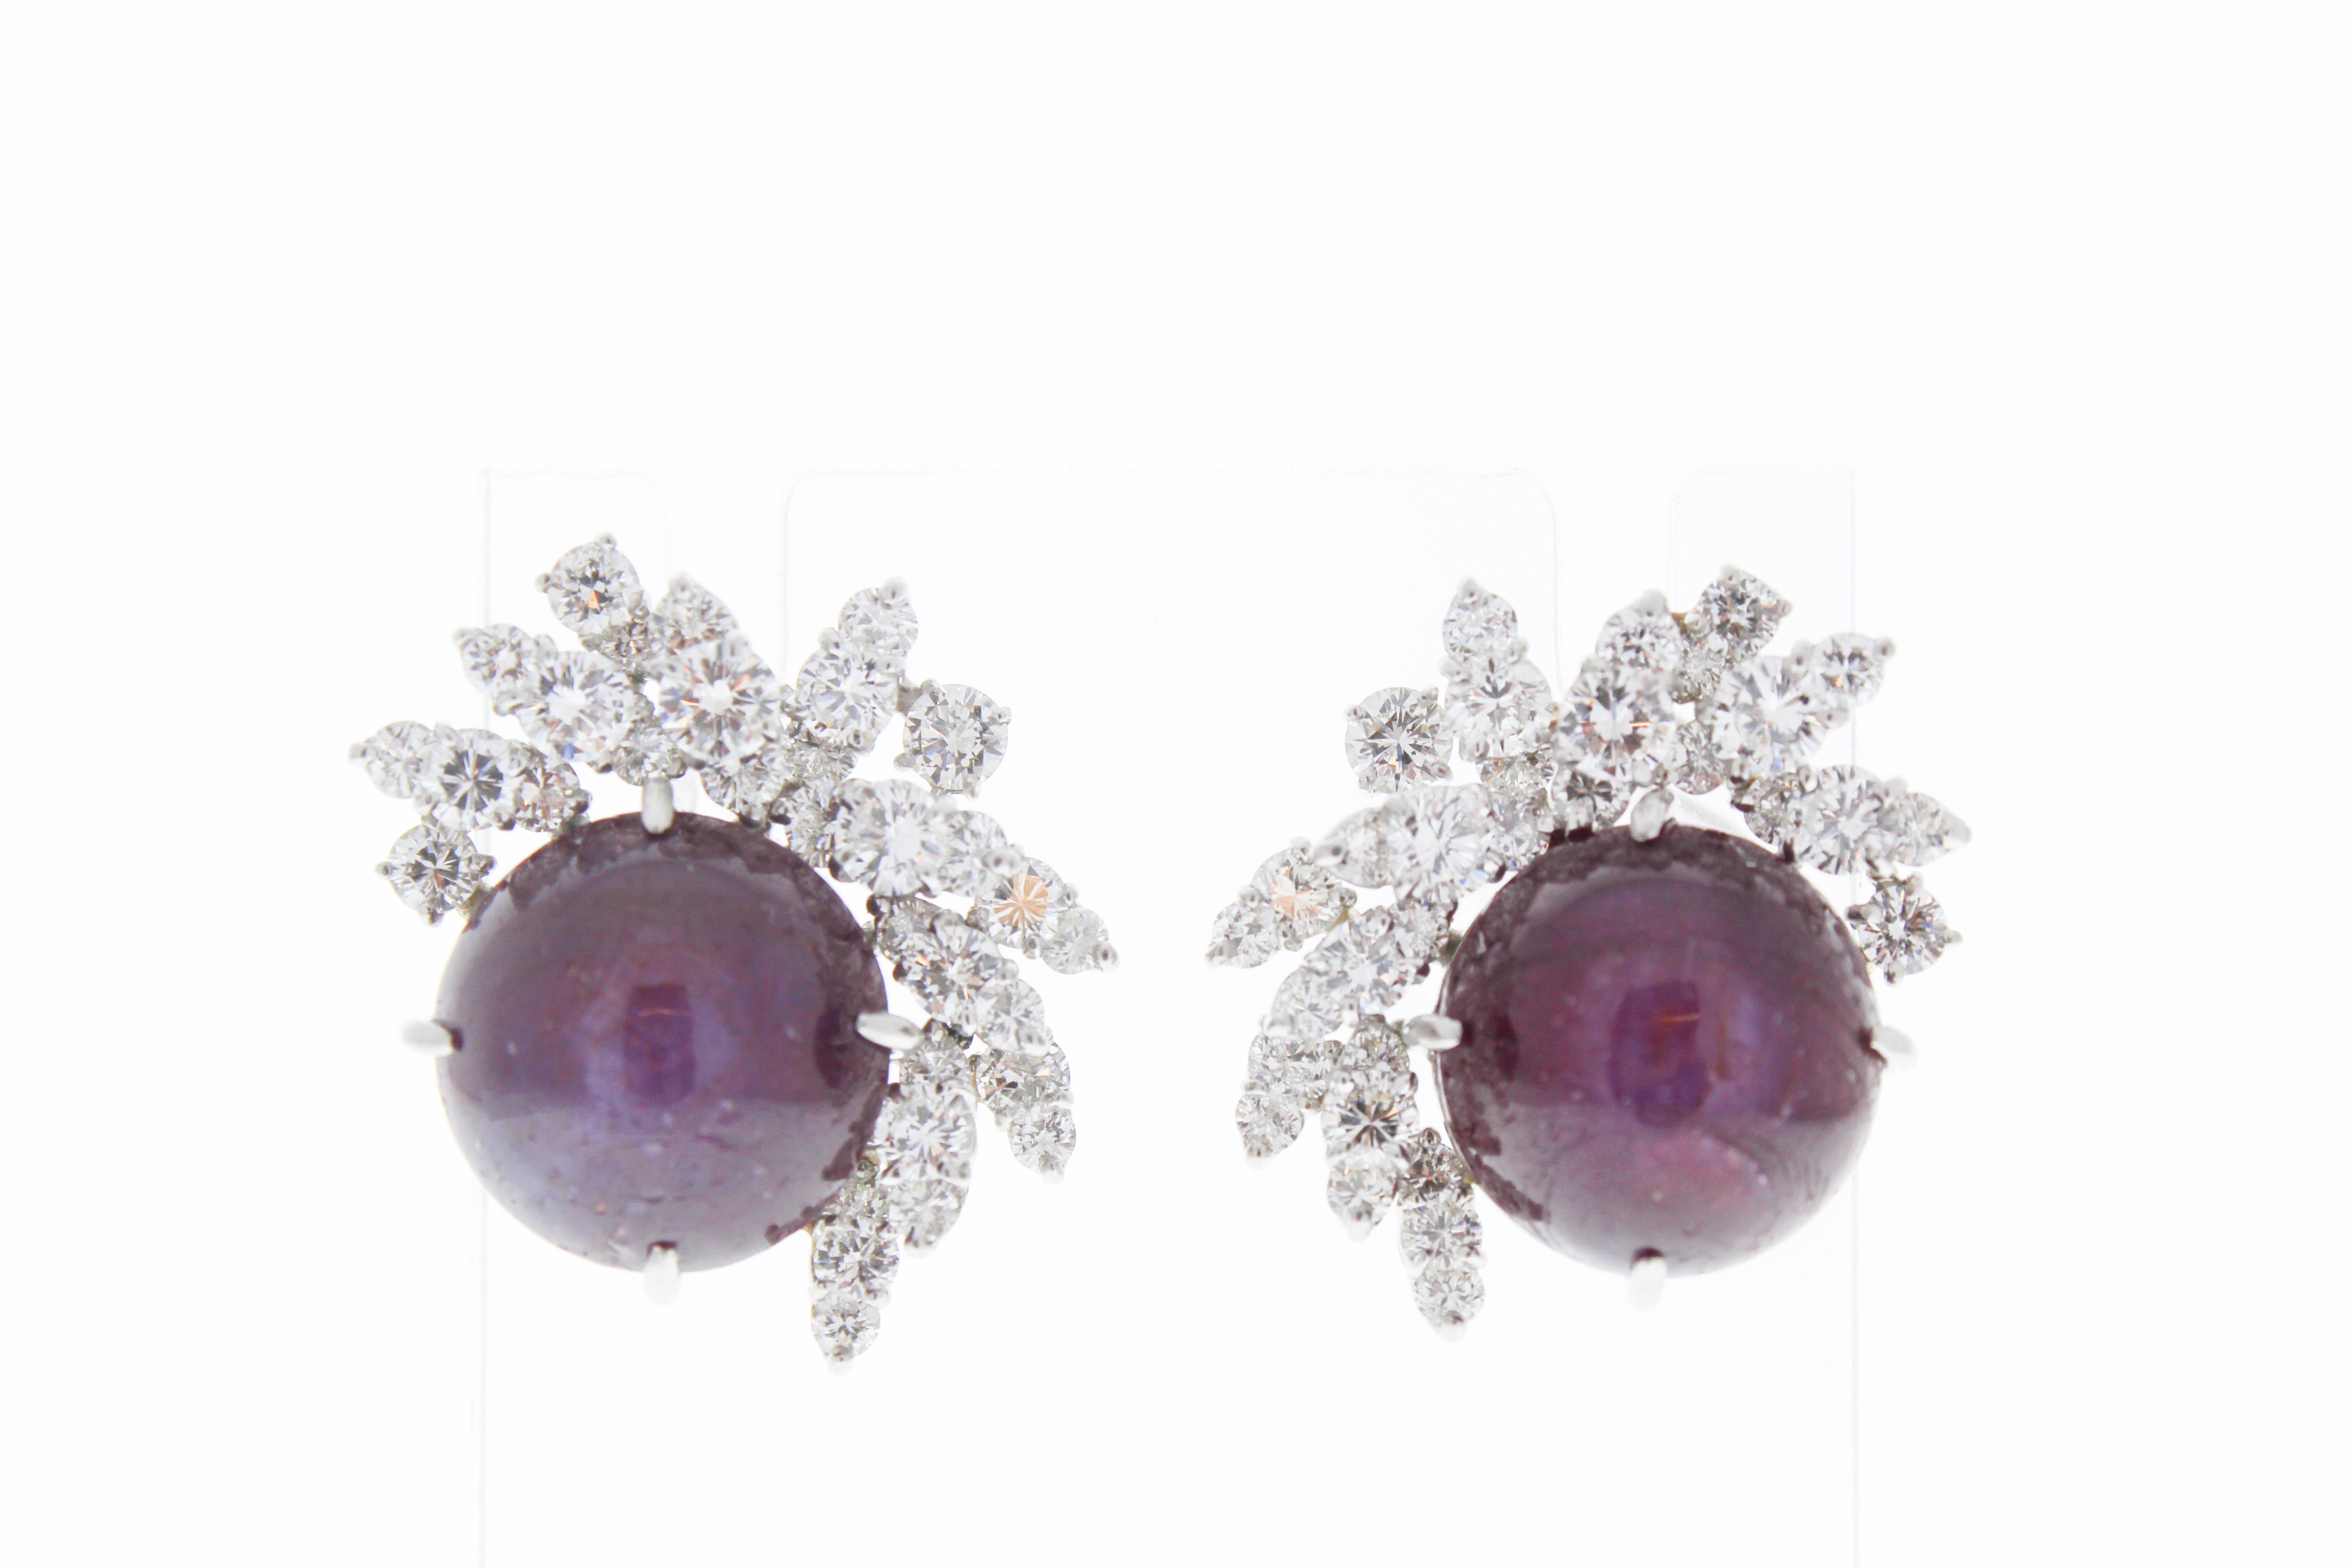 These unique earrings consist of two ruby cabochons that total up to 15carats. There are 64 diamonds that total up to 4.40carats.  The earrings are set in platinum.